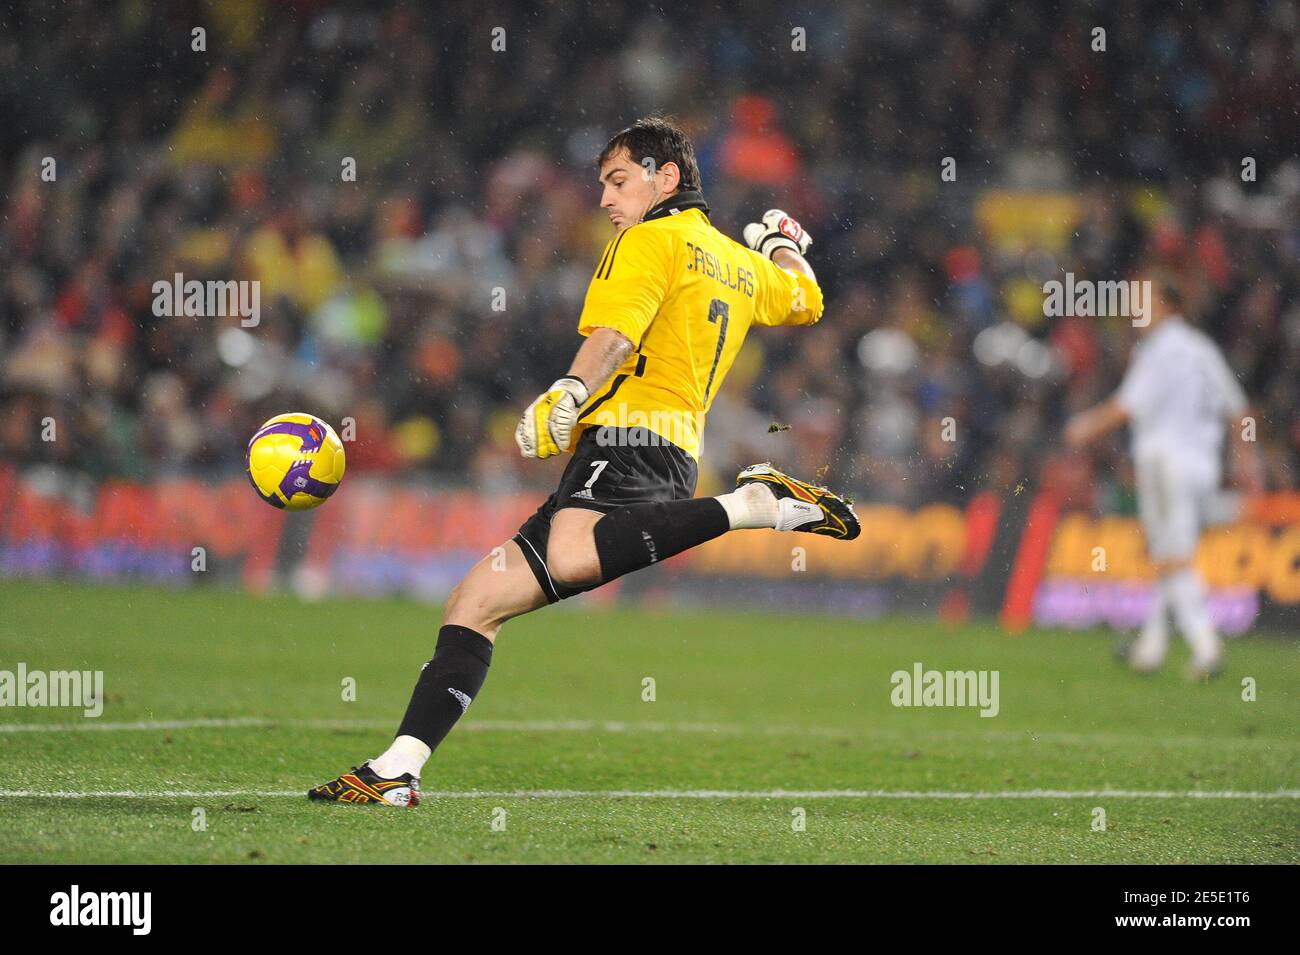 Real Madrid goalkeeper Iker Casillas during the Spanish First League Soccer match, FC Barcelona vs Real Madrid at at Nou Camp stadium in Barcelona, Spain on December 13, 2008. Barcelona won 2-0. Photo by Steeve McMay,Cameleon/ABACAPRESS.COM Stock Photo